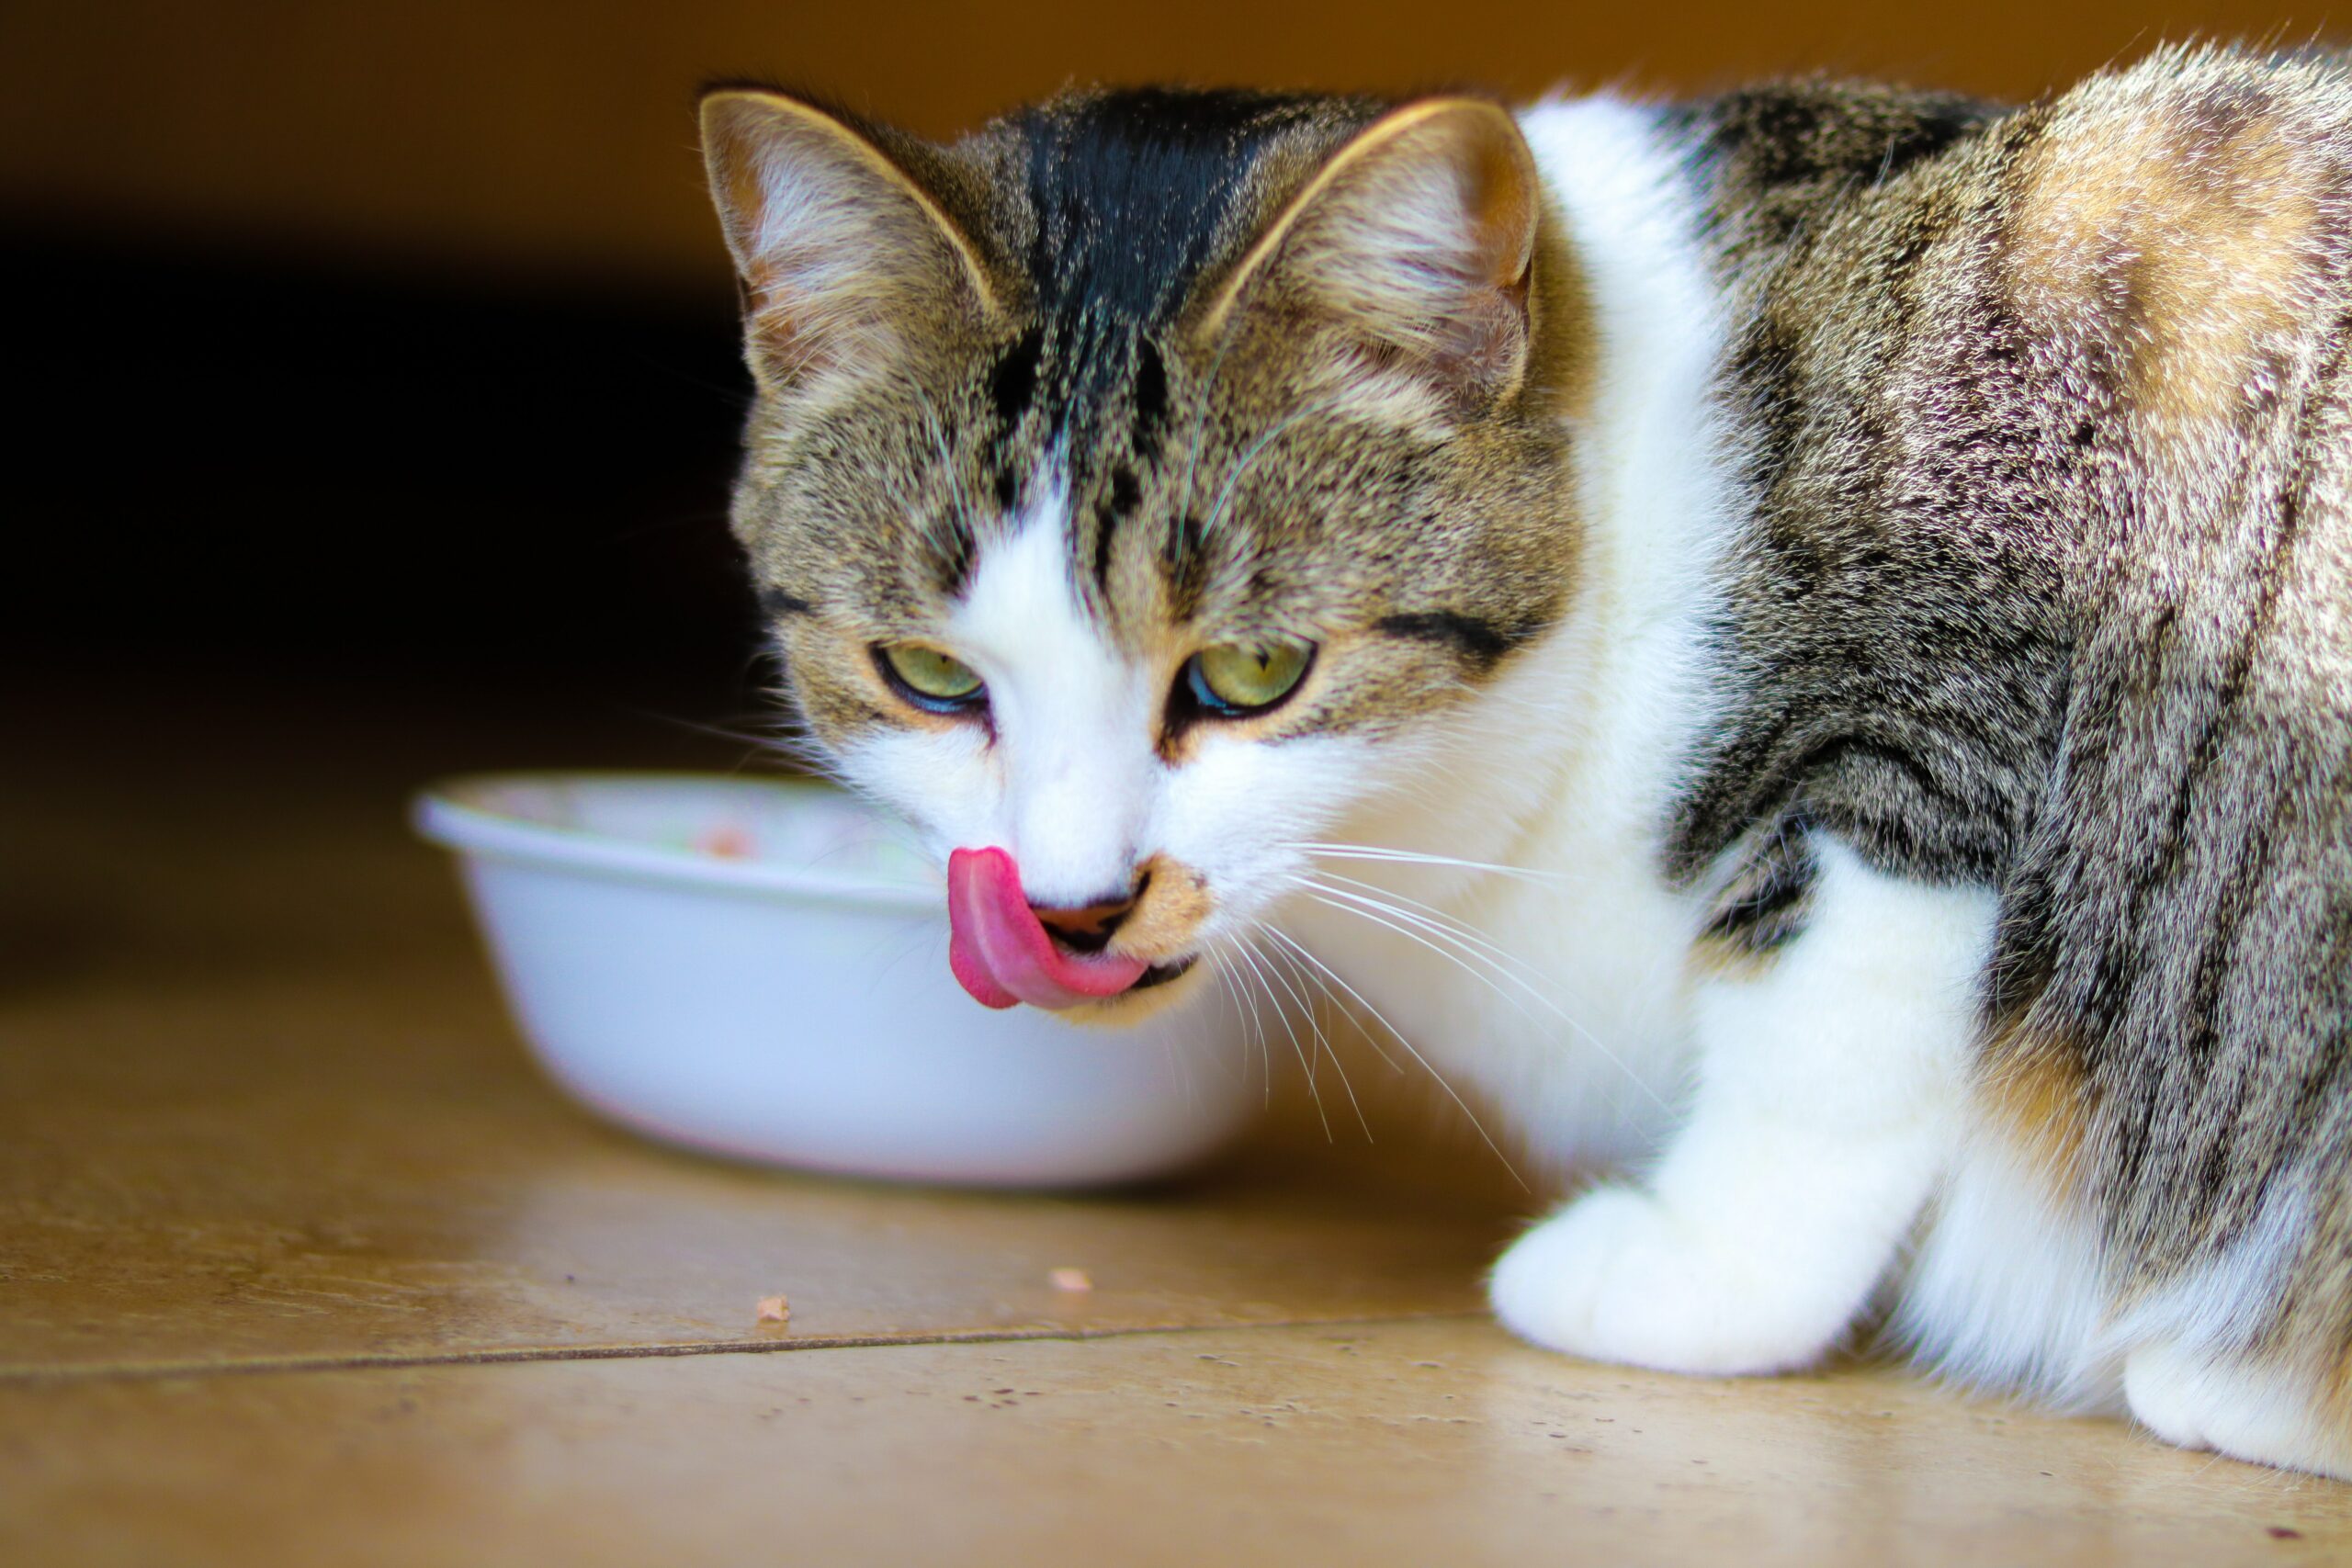 How long can cats go without food?